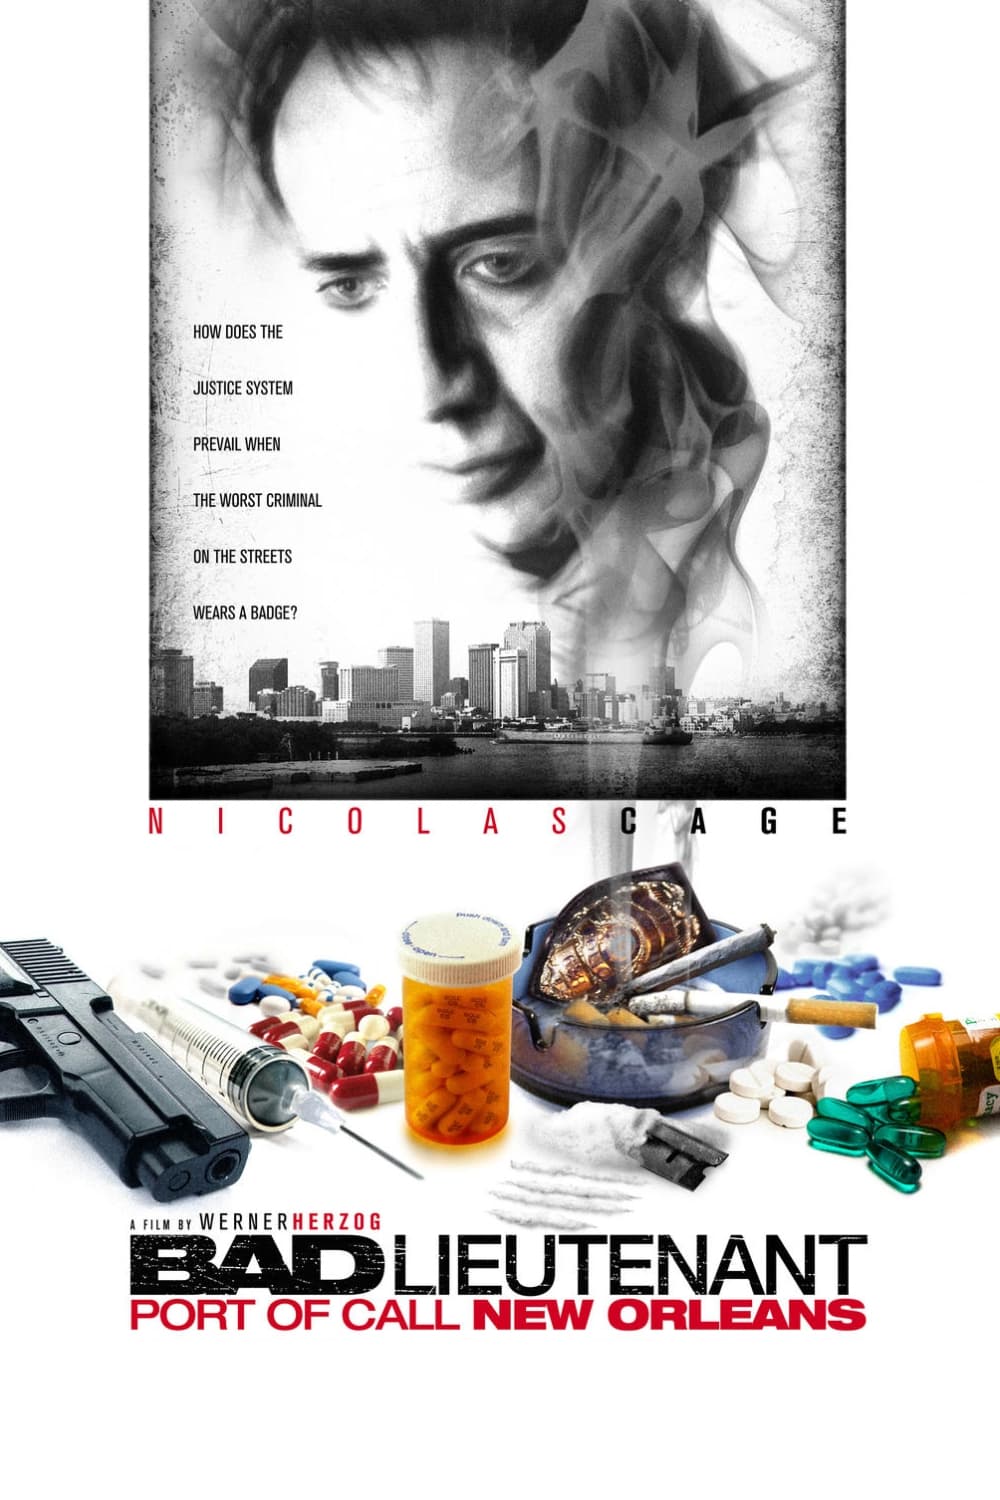 Bad Lieutenant: Port of Call - New Orleans (2009)